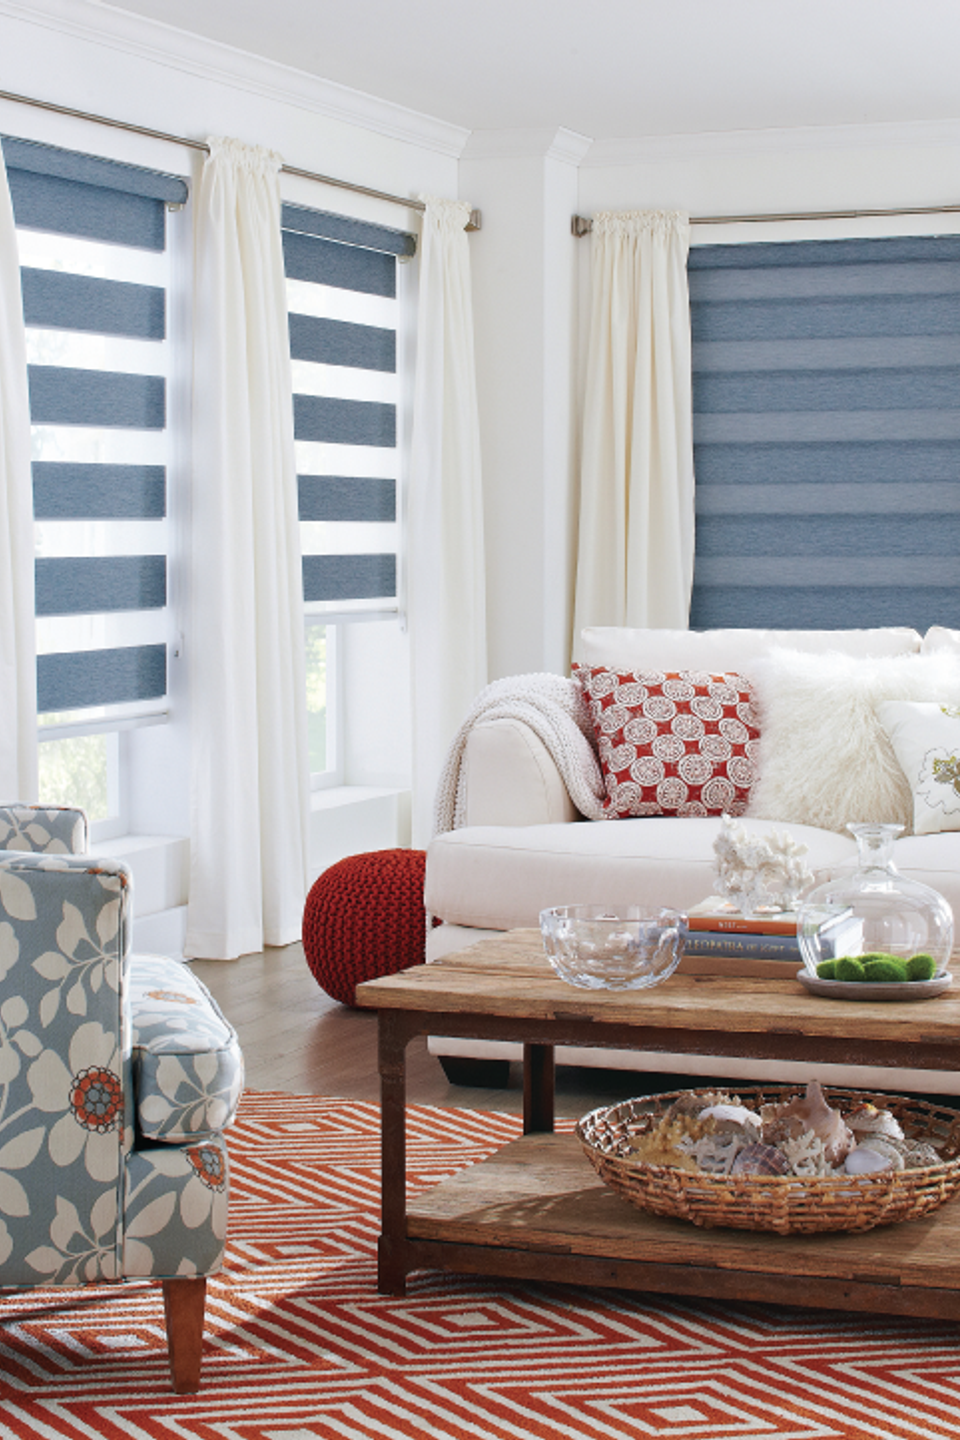 Custom Blinds and Drapes in a home